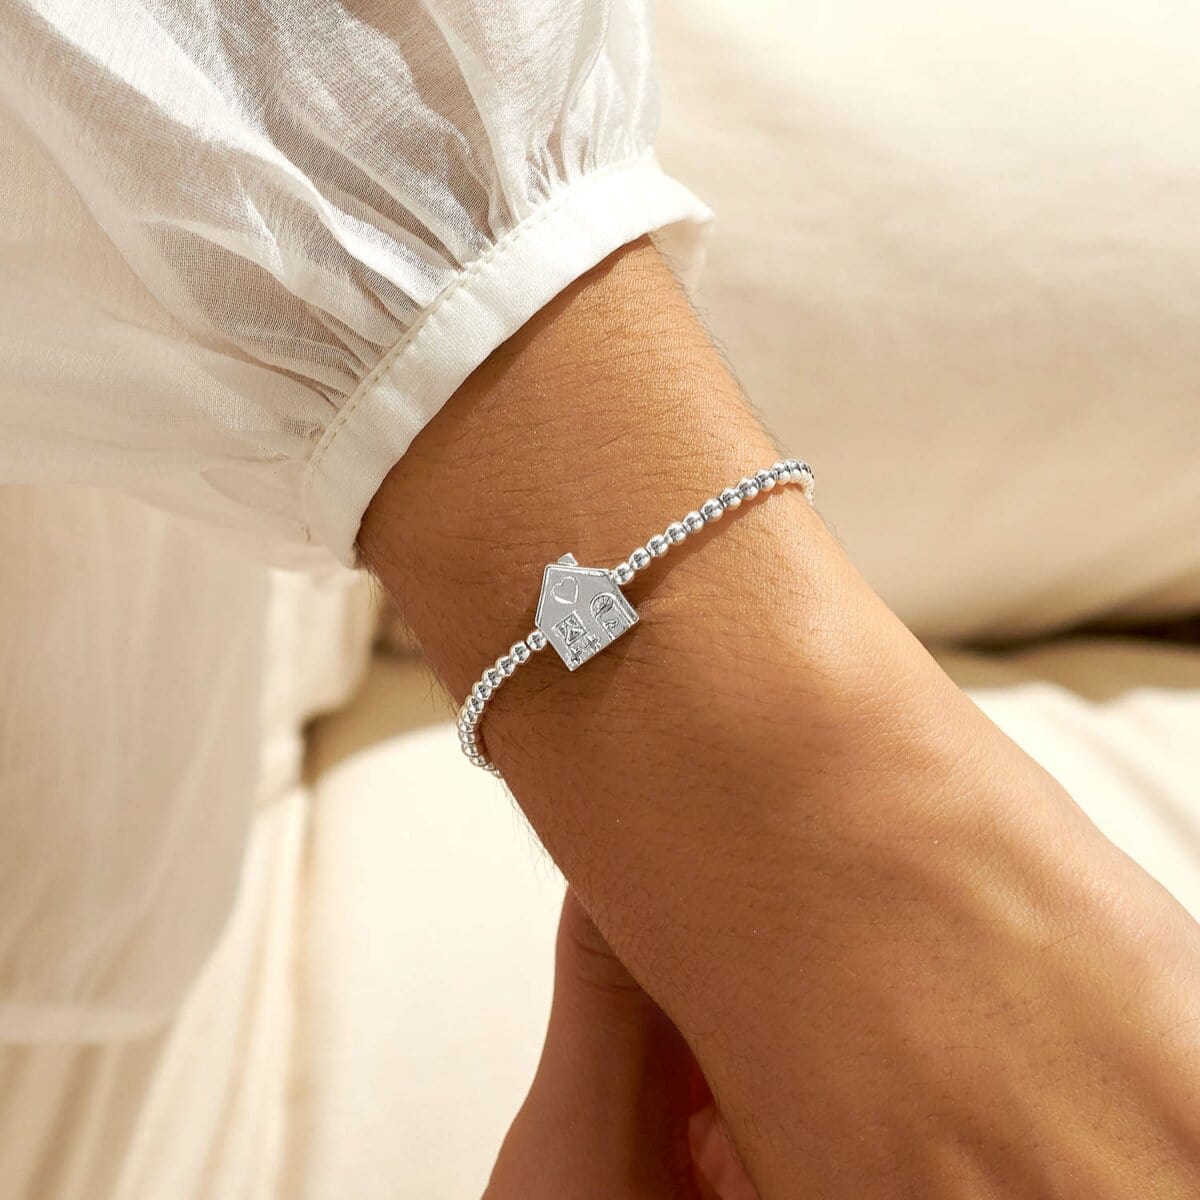 Joma Jewellery Bracelet Joma Jewellery Bracelet - A Little Happy First Home